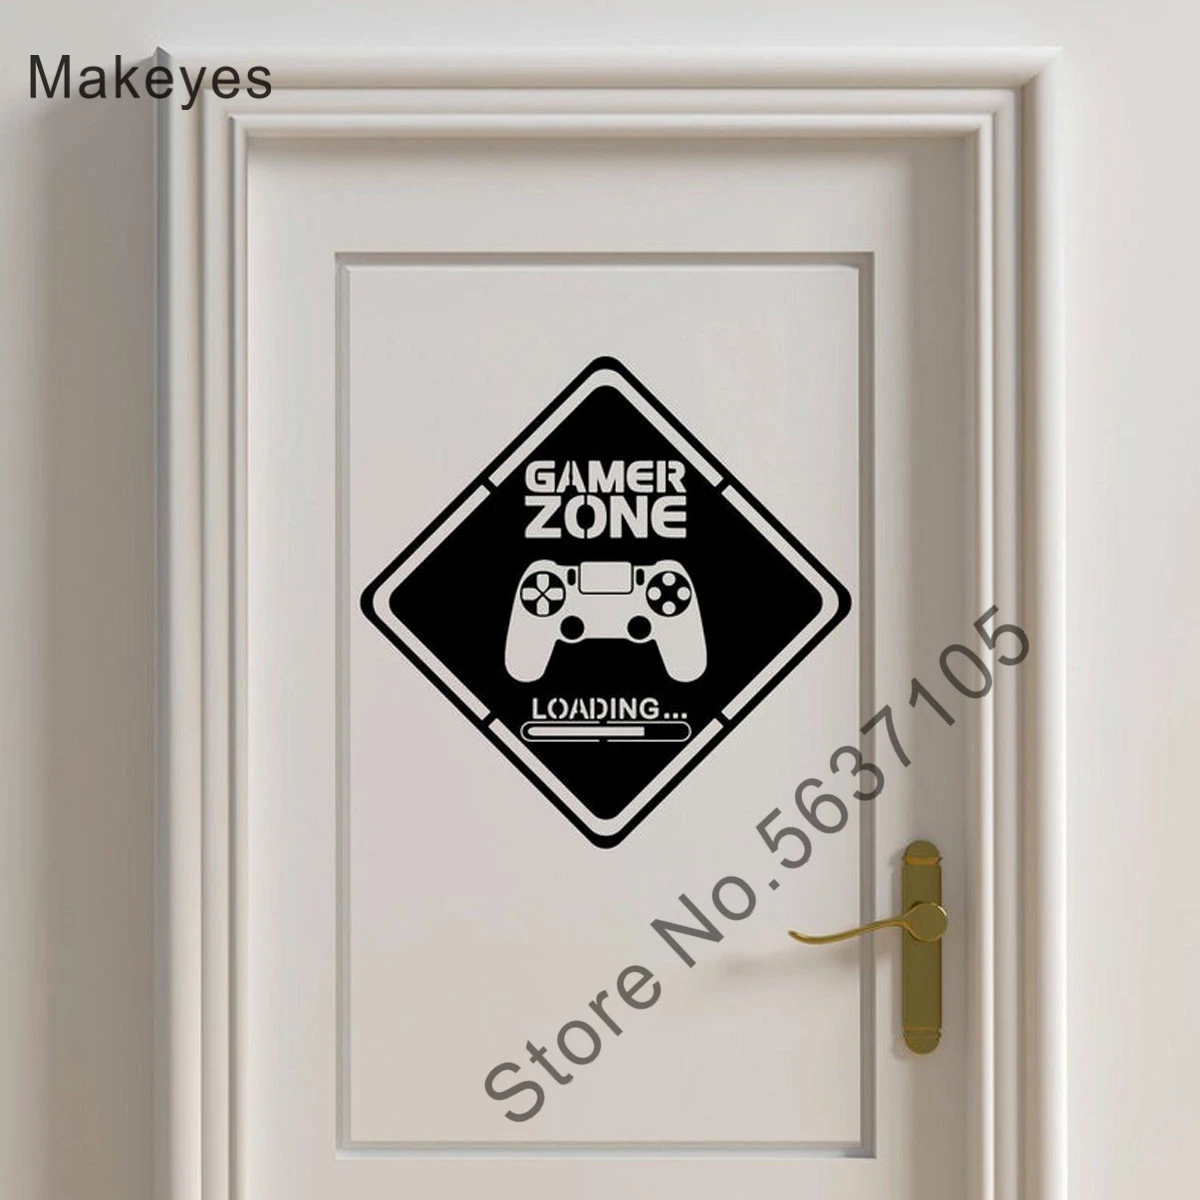 Makeyes Game Zone Wall Decal Room Doors Decal Gamer Wall Decor Sticker Painted Wallpaper Vinyl Design Game Zone Wall Decals Q005